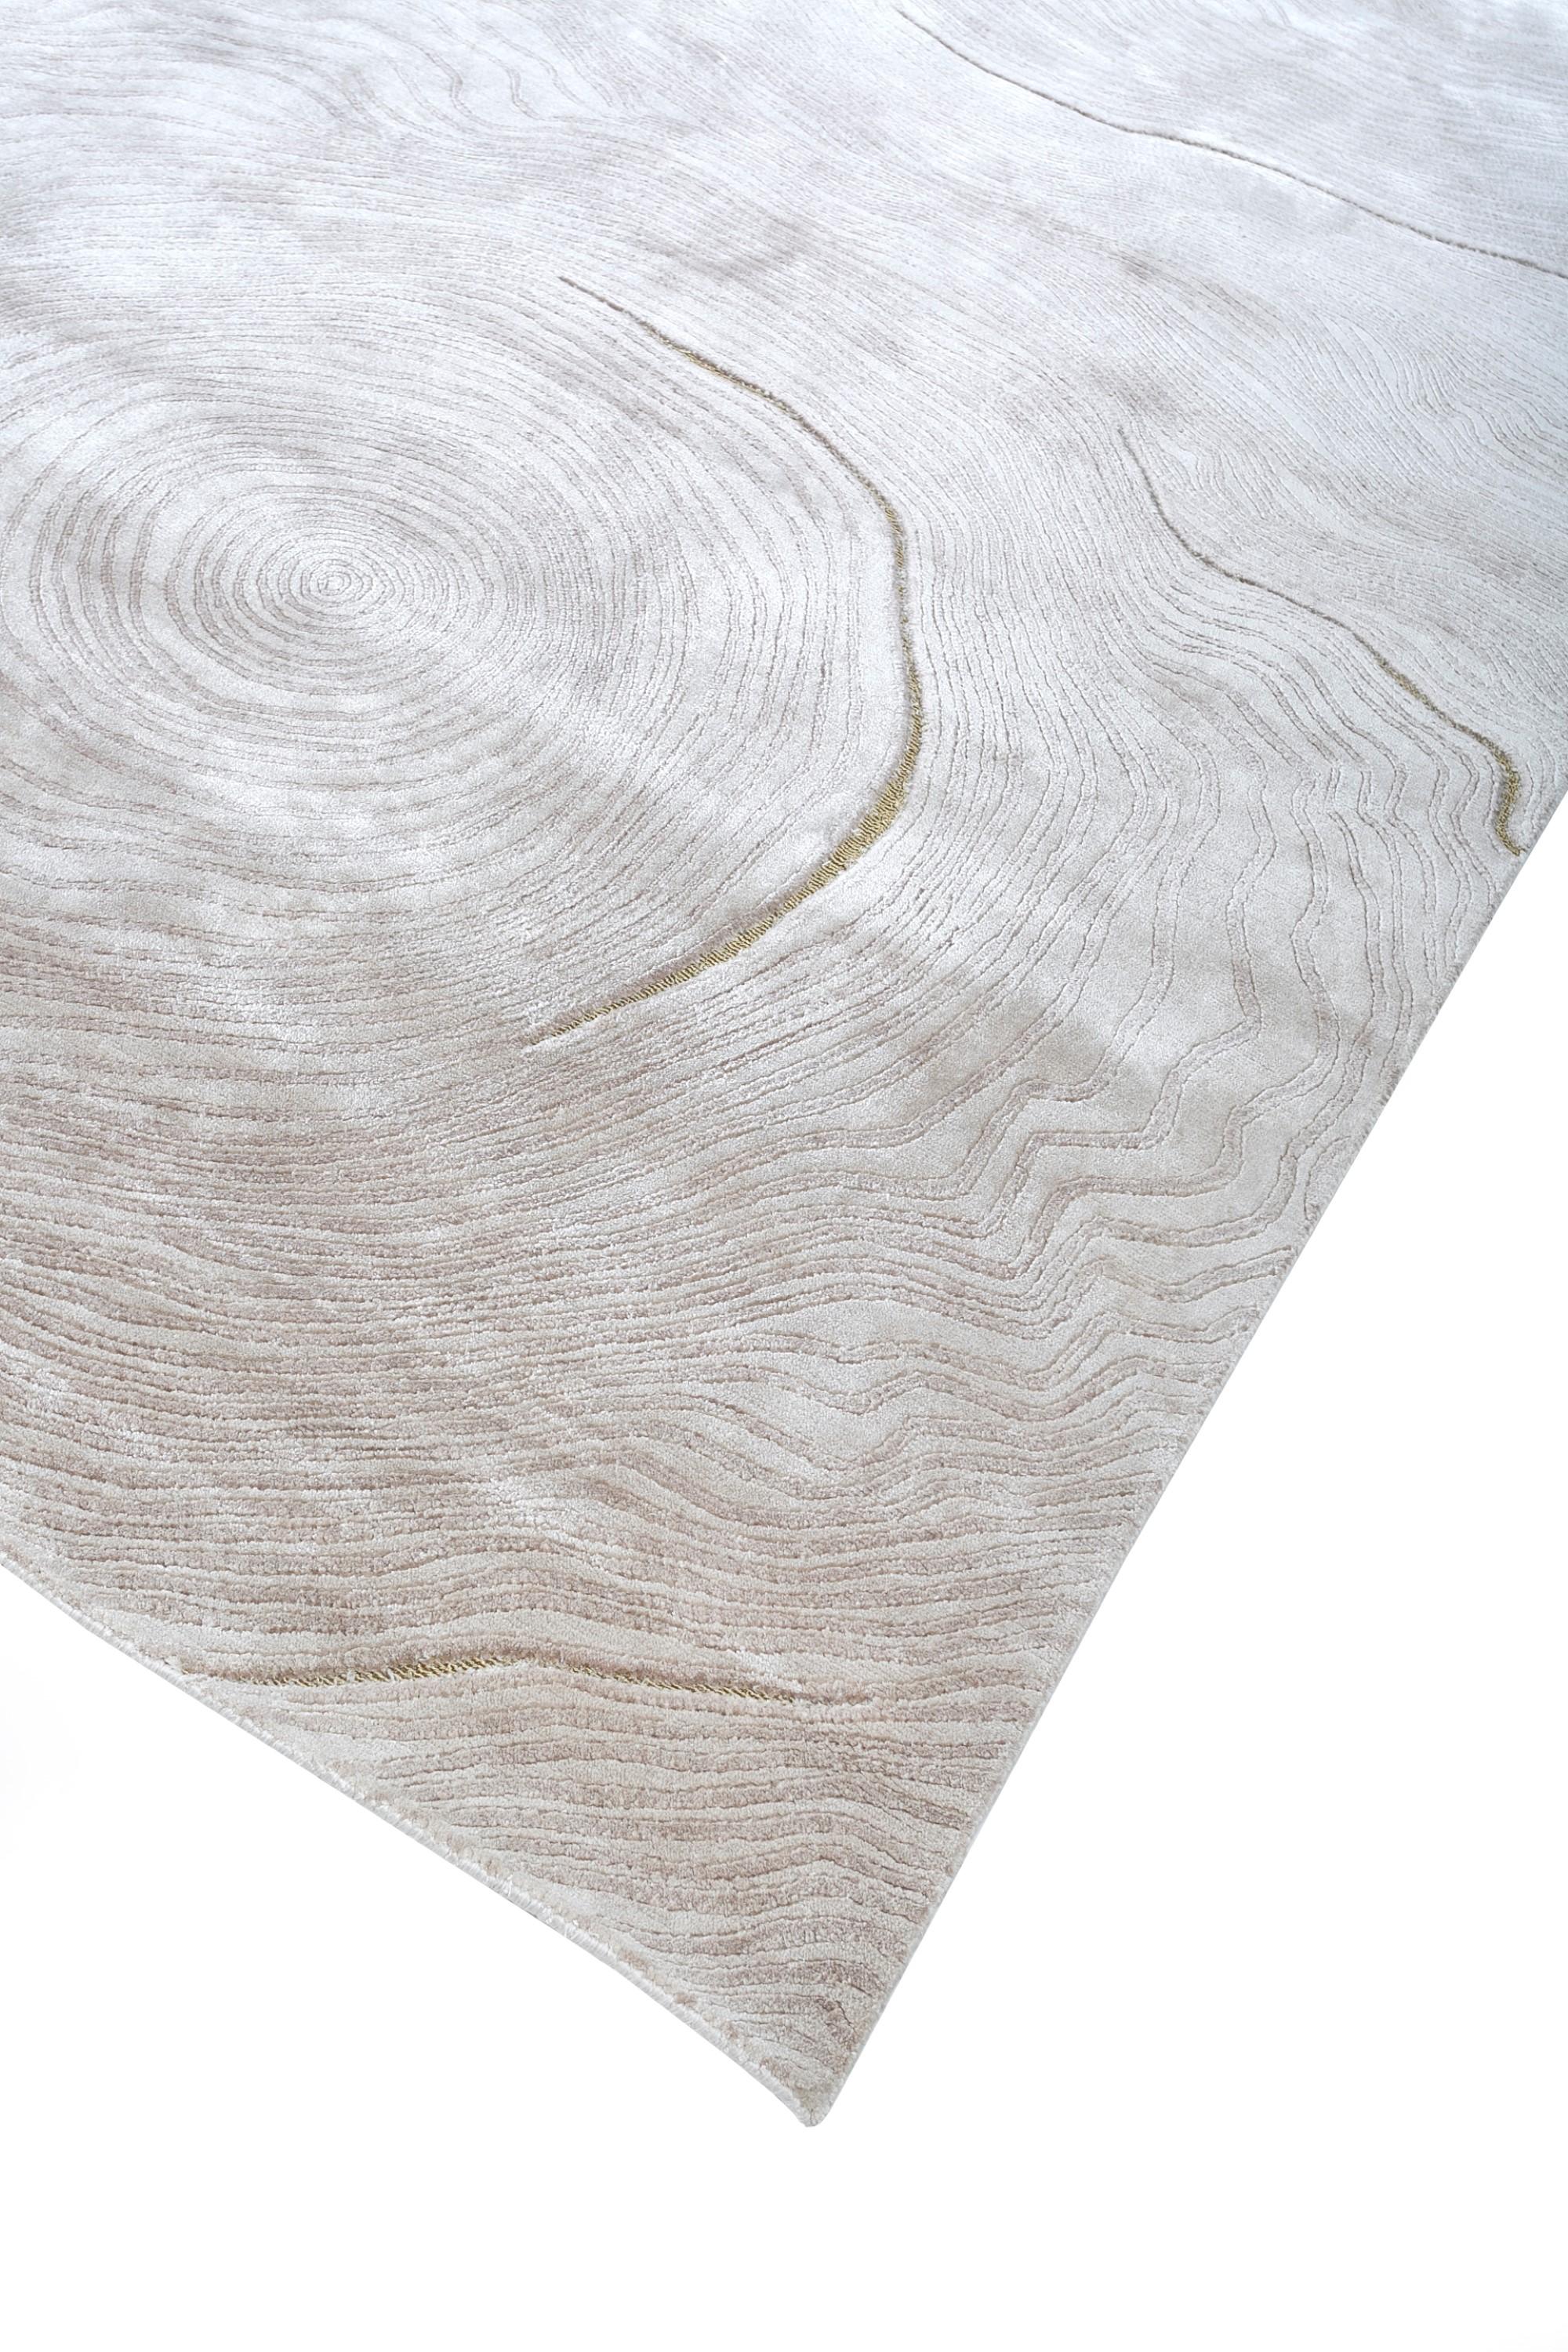 Indian Dune Drift Marble & White Sand 300x420 cm Hand Knotted Rug For Sale